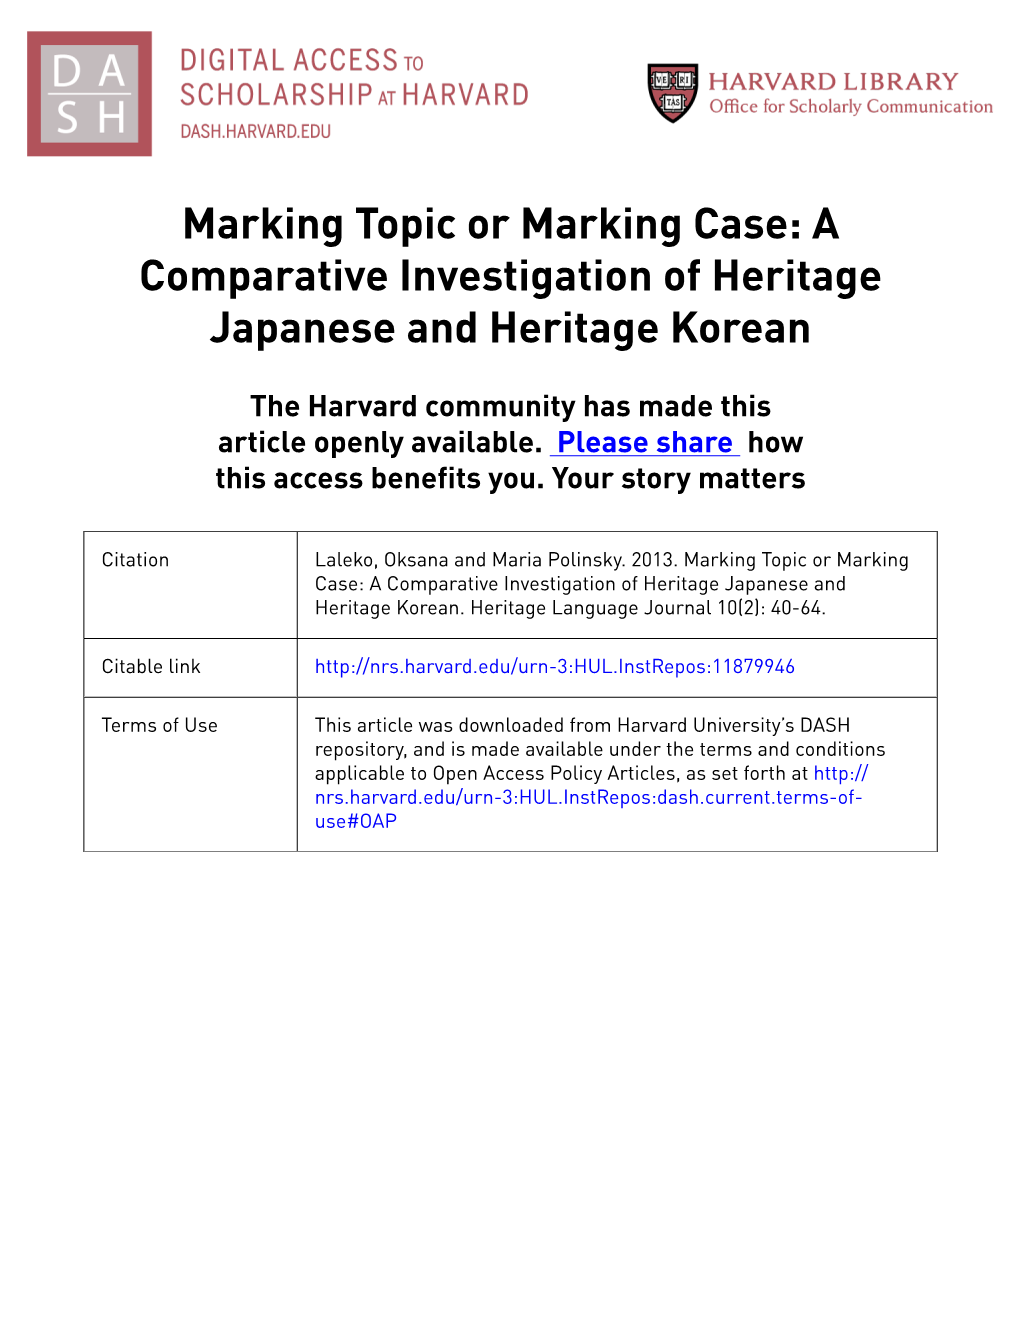 Marking Topic Or Marking Case: a Comparative Investigation of Heritage Japanese and Heritage Korean